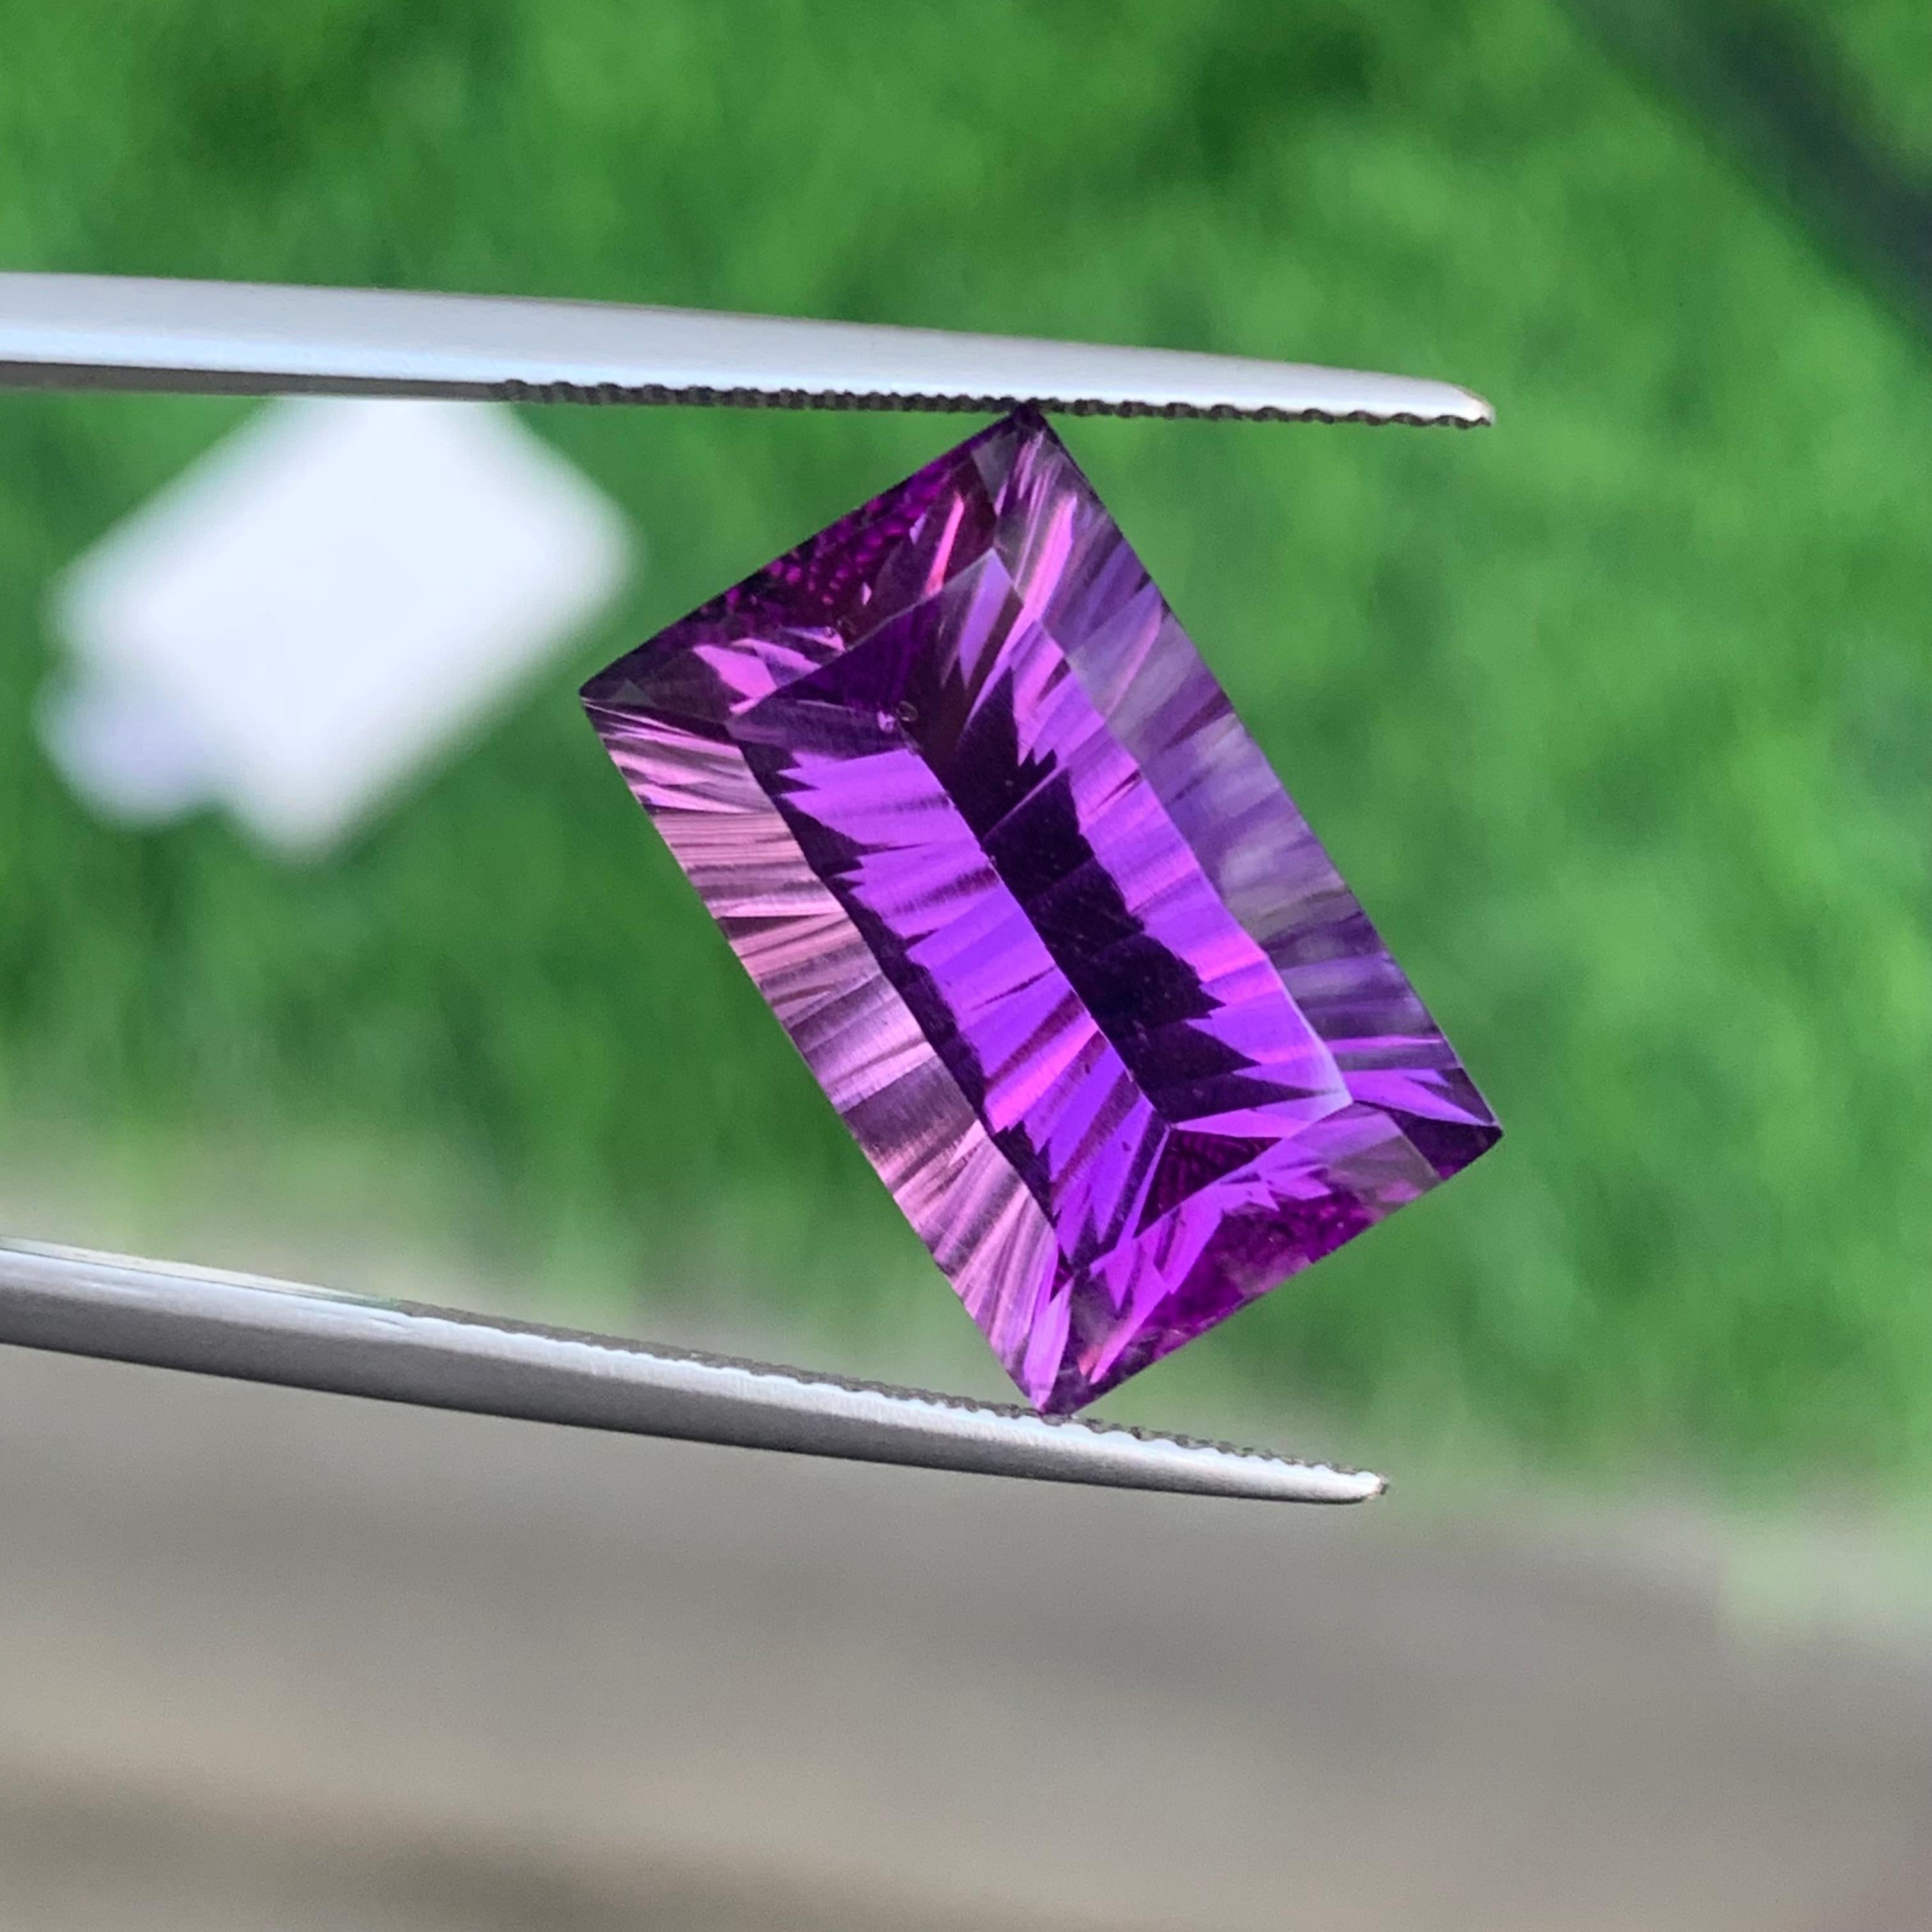 Emerald Cut 10.35 Carat Laser Cut Faceted Amethyst Gemstone Available For Sale  For Sale